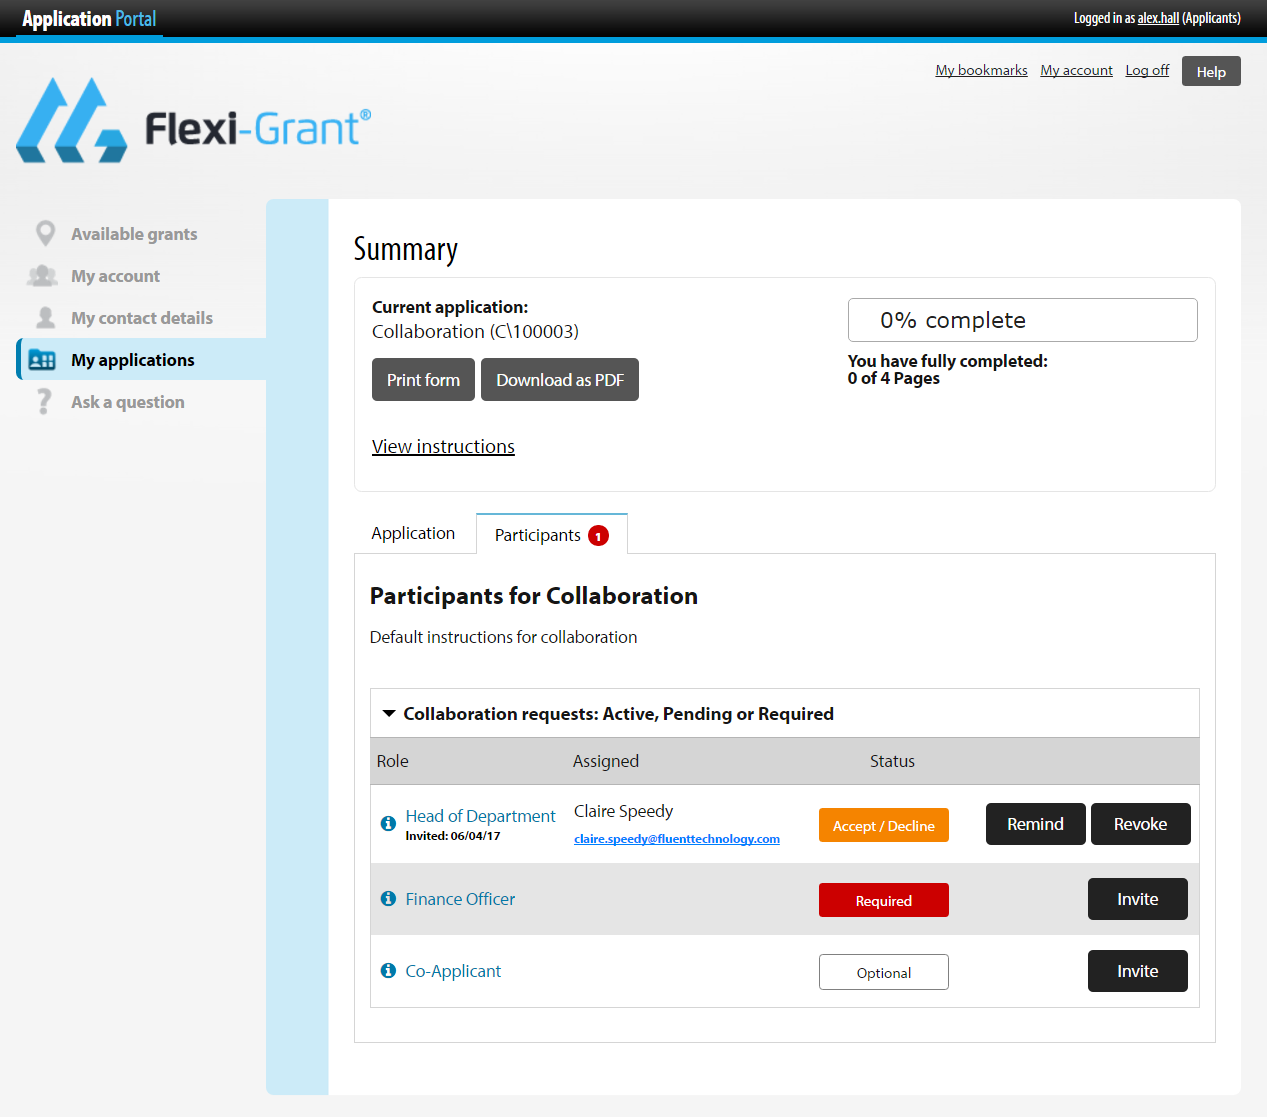 Create a better application process with Flexi-Grant’s collaboration feature. Capture references, Head of Department sign-off, payment information and give the lead applicant the power to invite and remind co-applicants